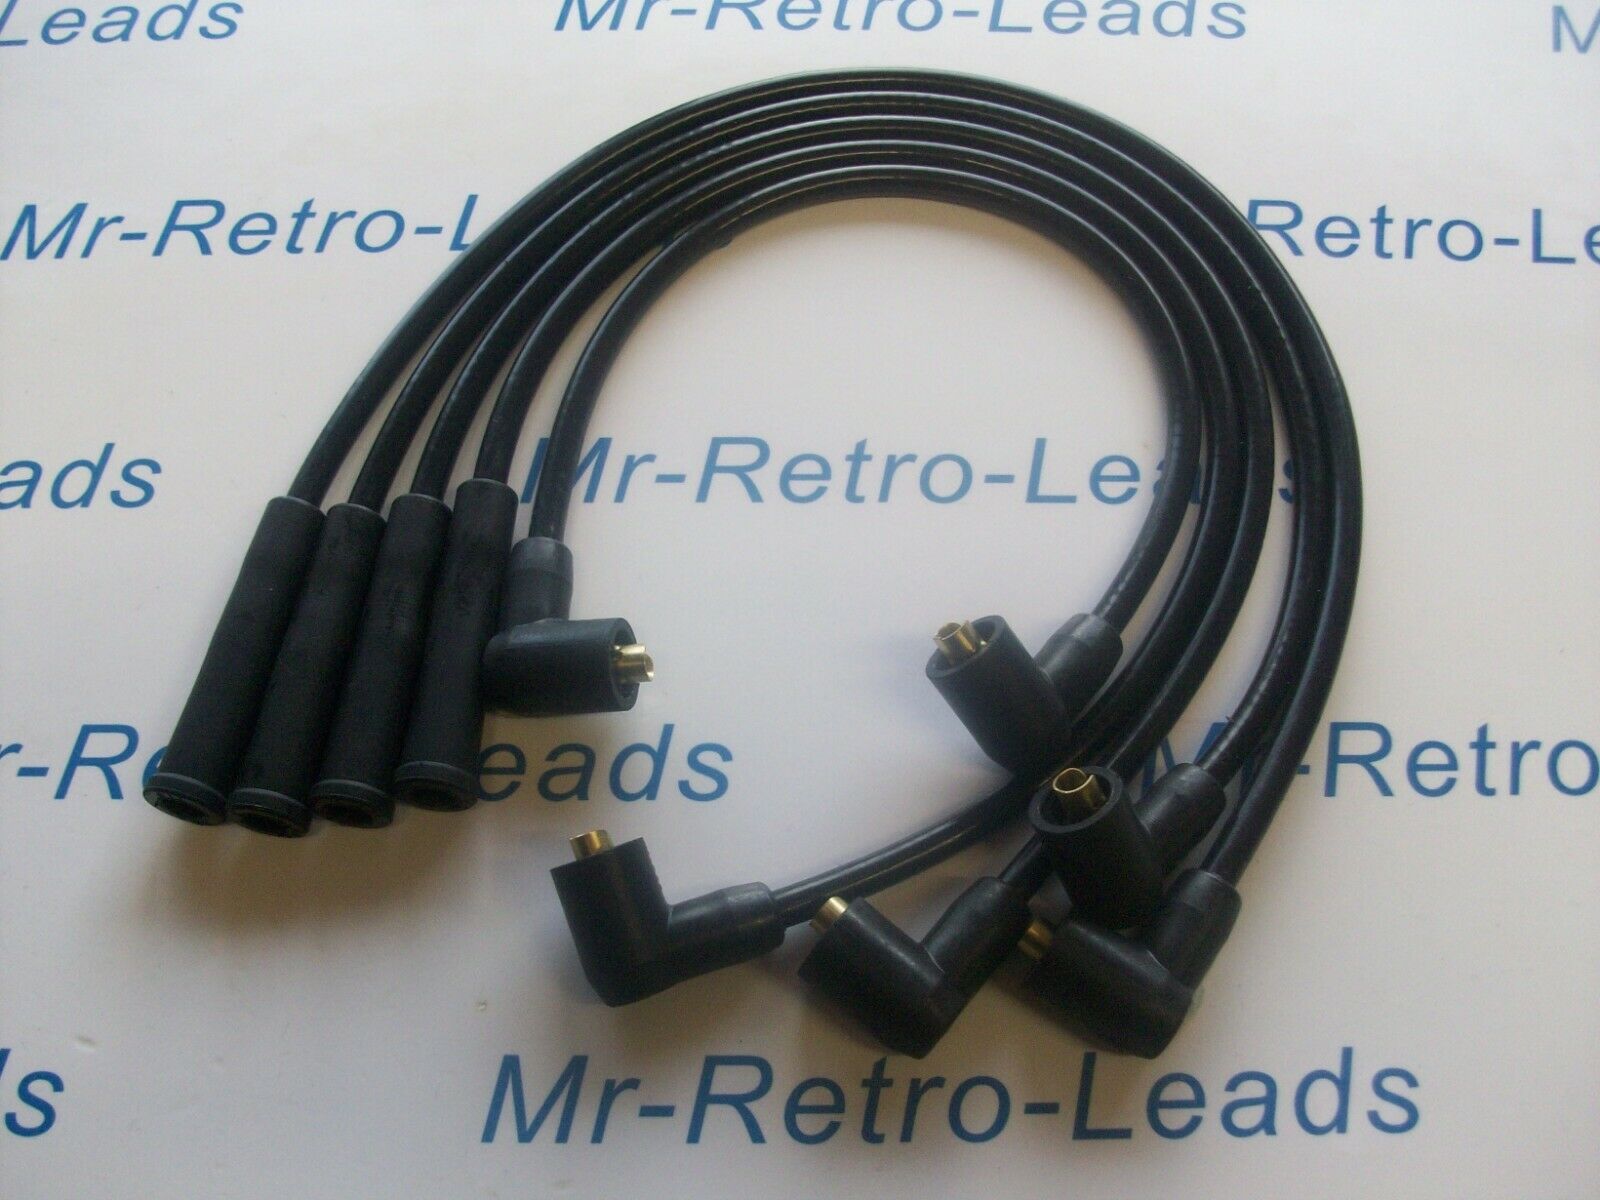 Black 8mm Performance Ignition Leads For Ford Transit 1.6 77 > 86 Choice 2 / 2